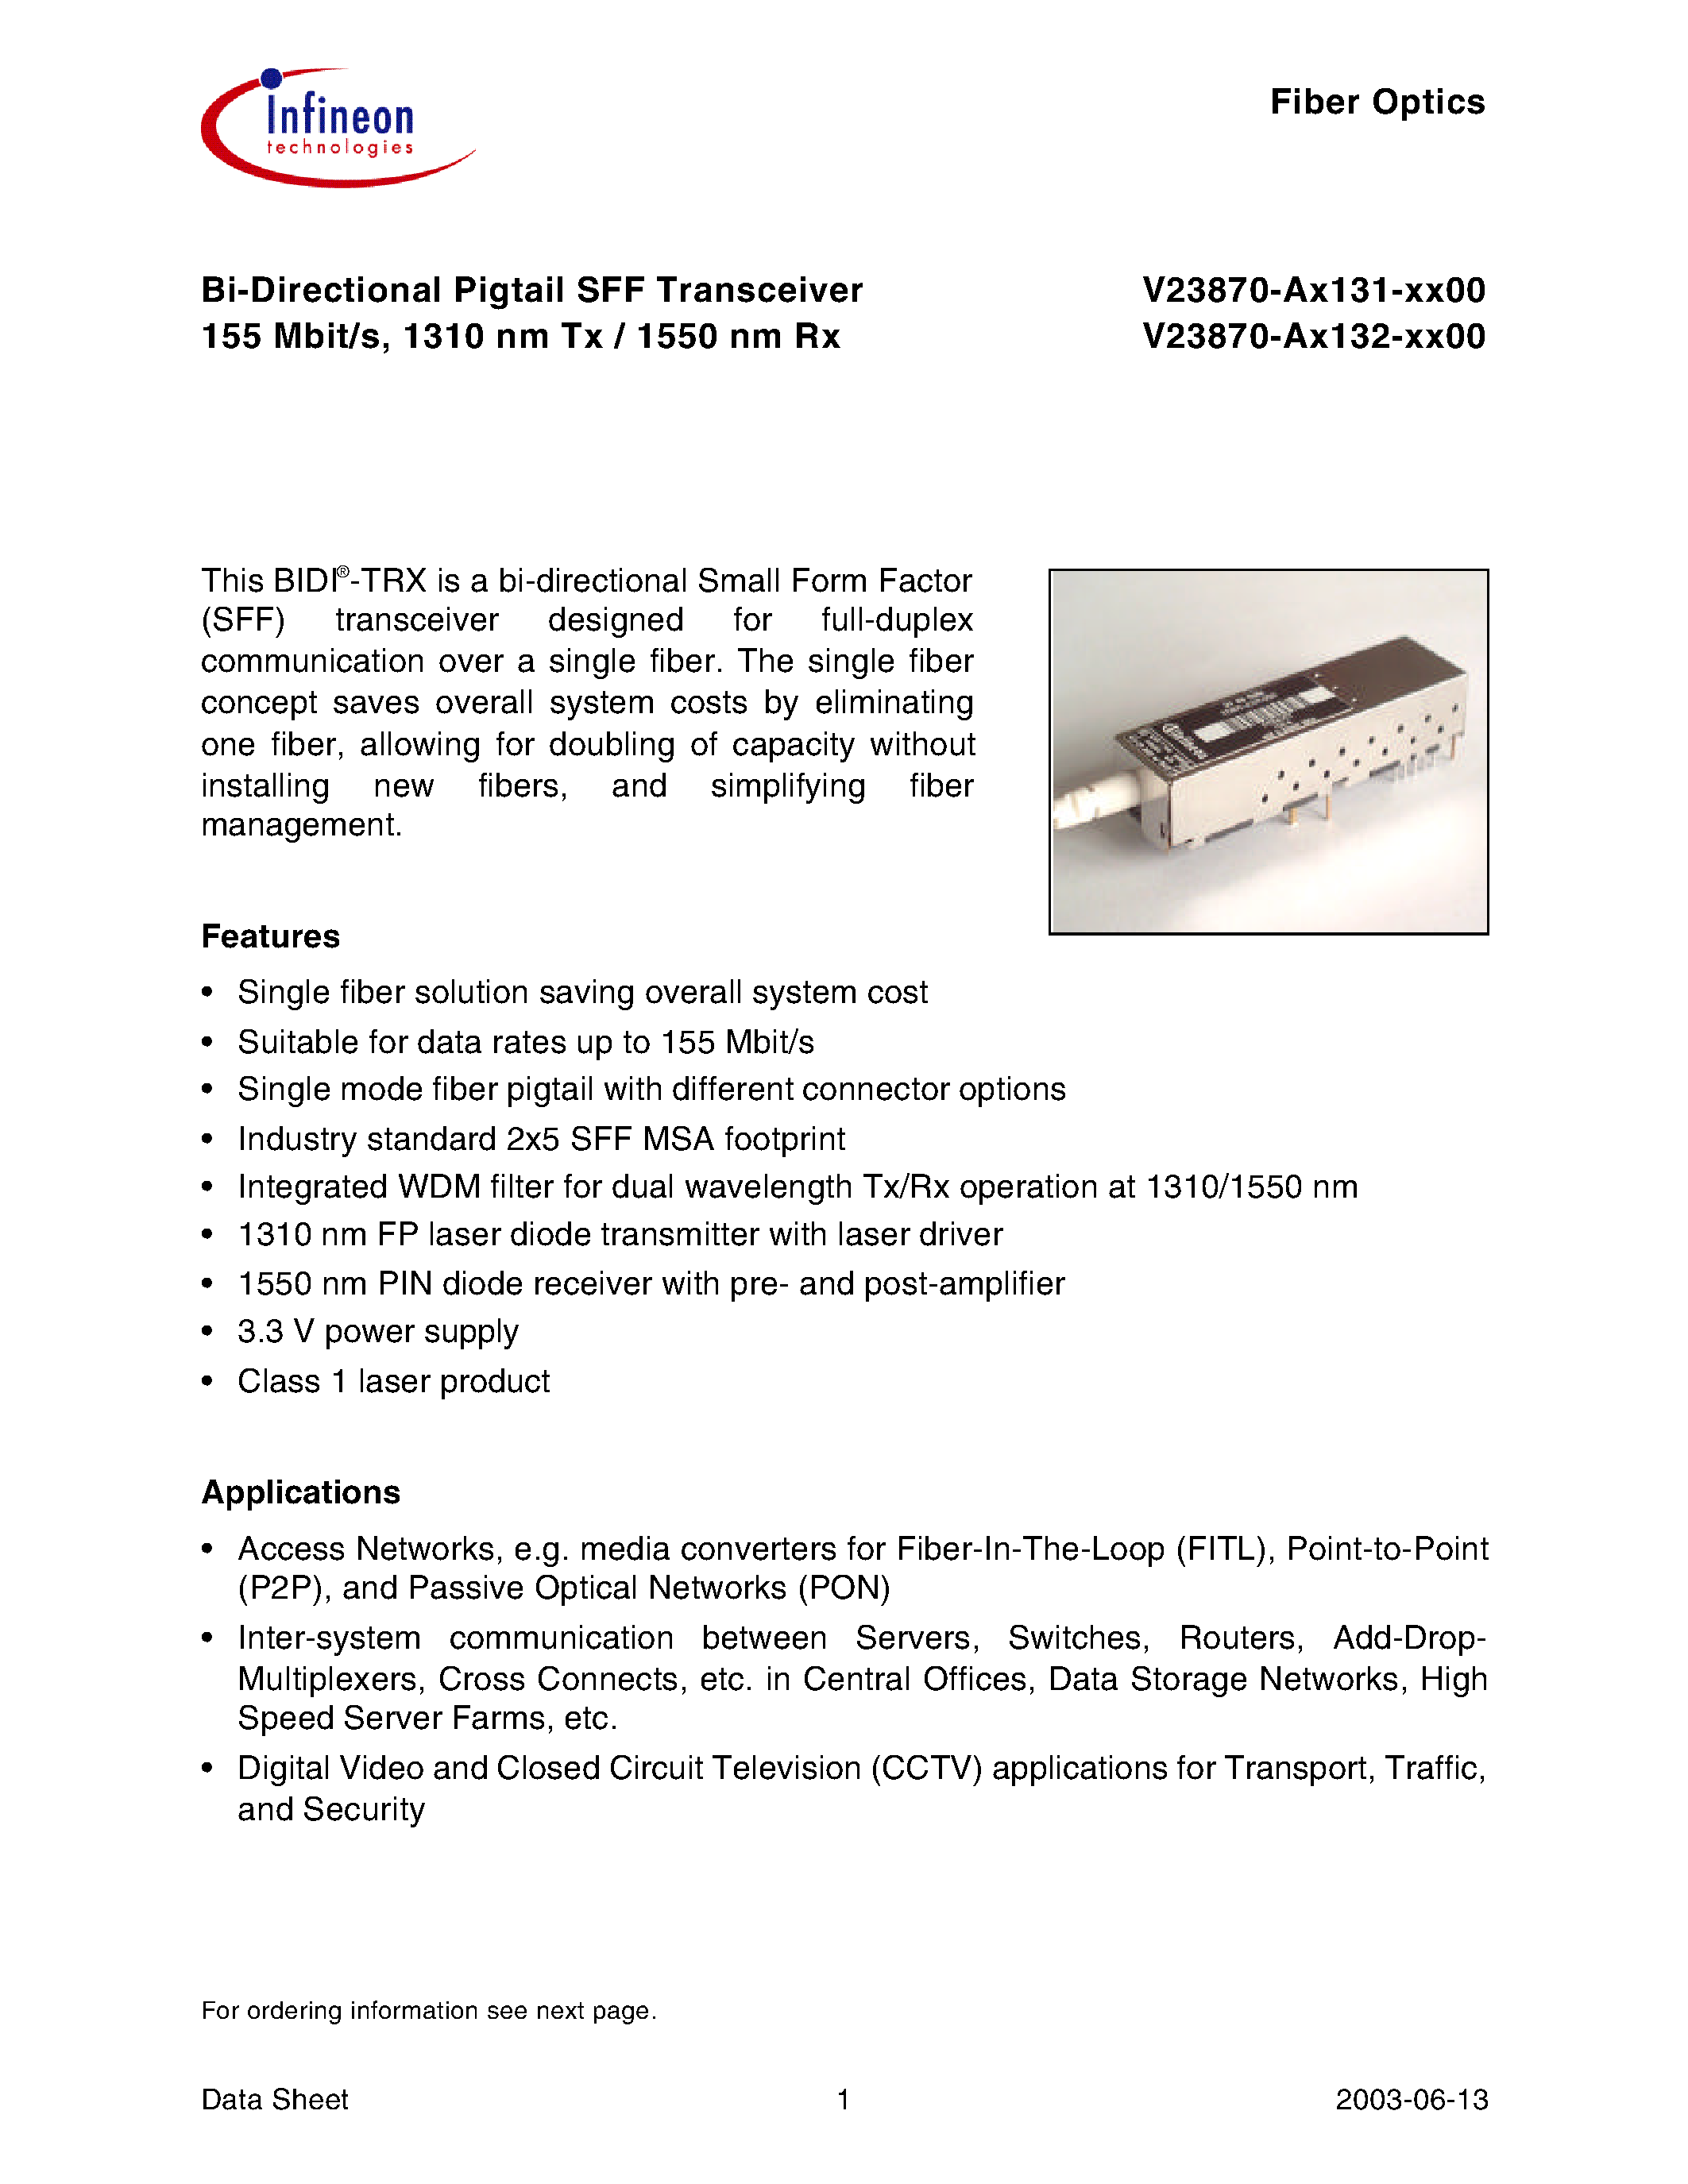 Datasheet V23870-A3131-F200 - Bi-Directional Pigtail SFF Transceiver 155 Mbit/s/ 1310 nm Tx / 1550 nm Rx page 1